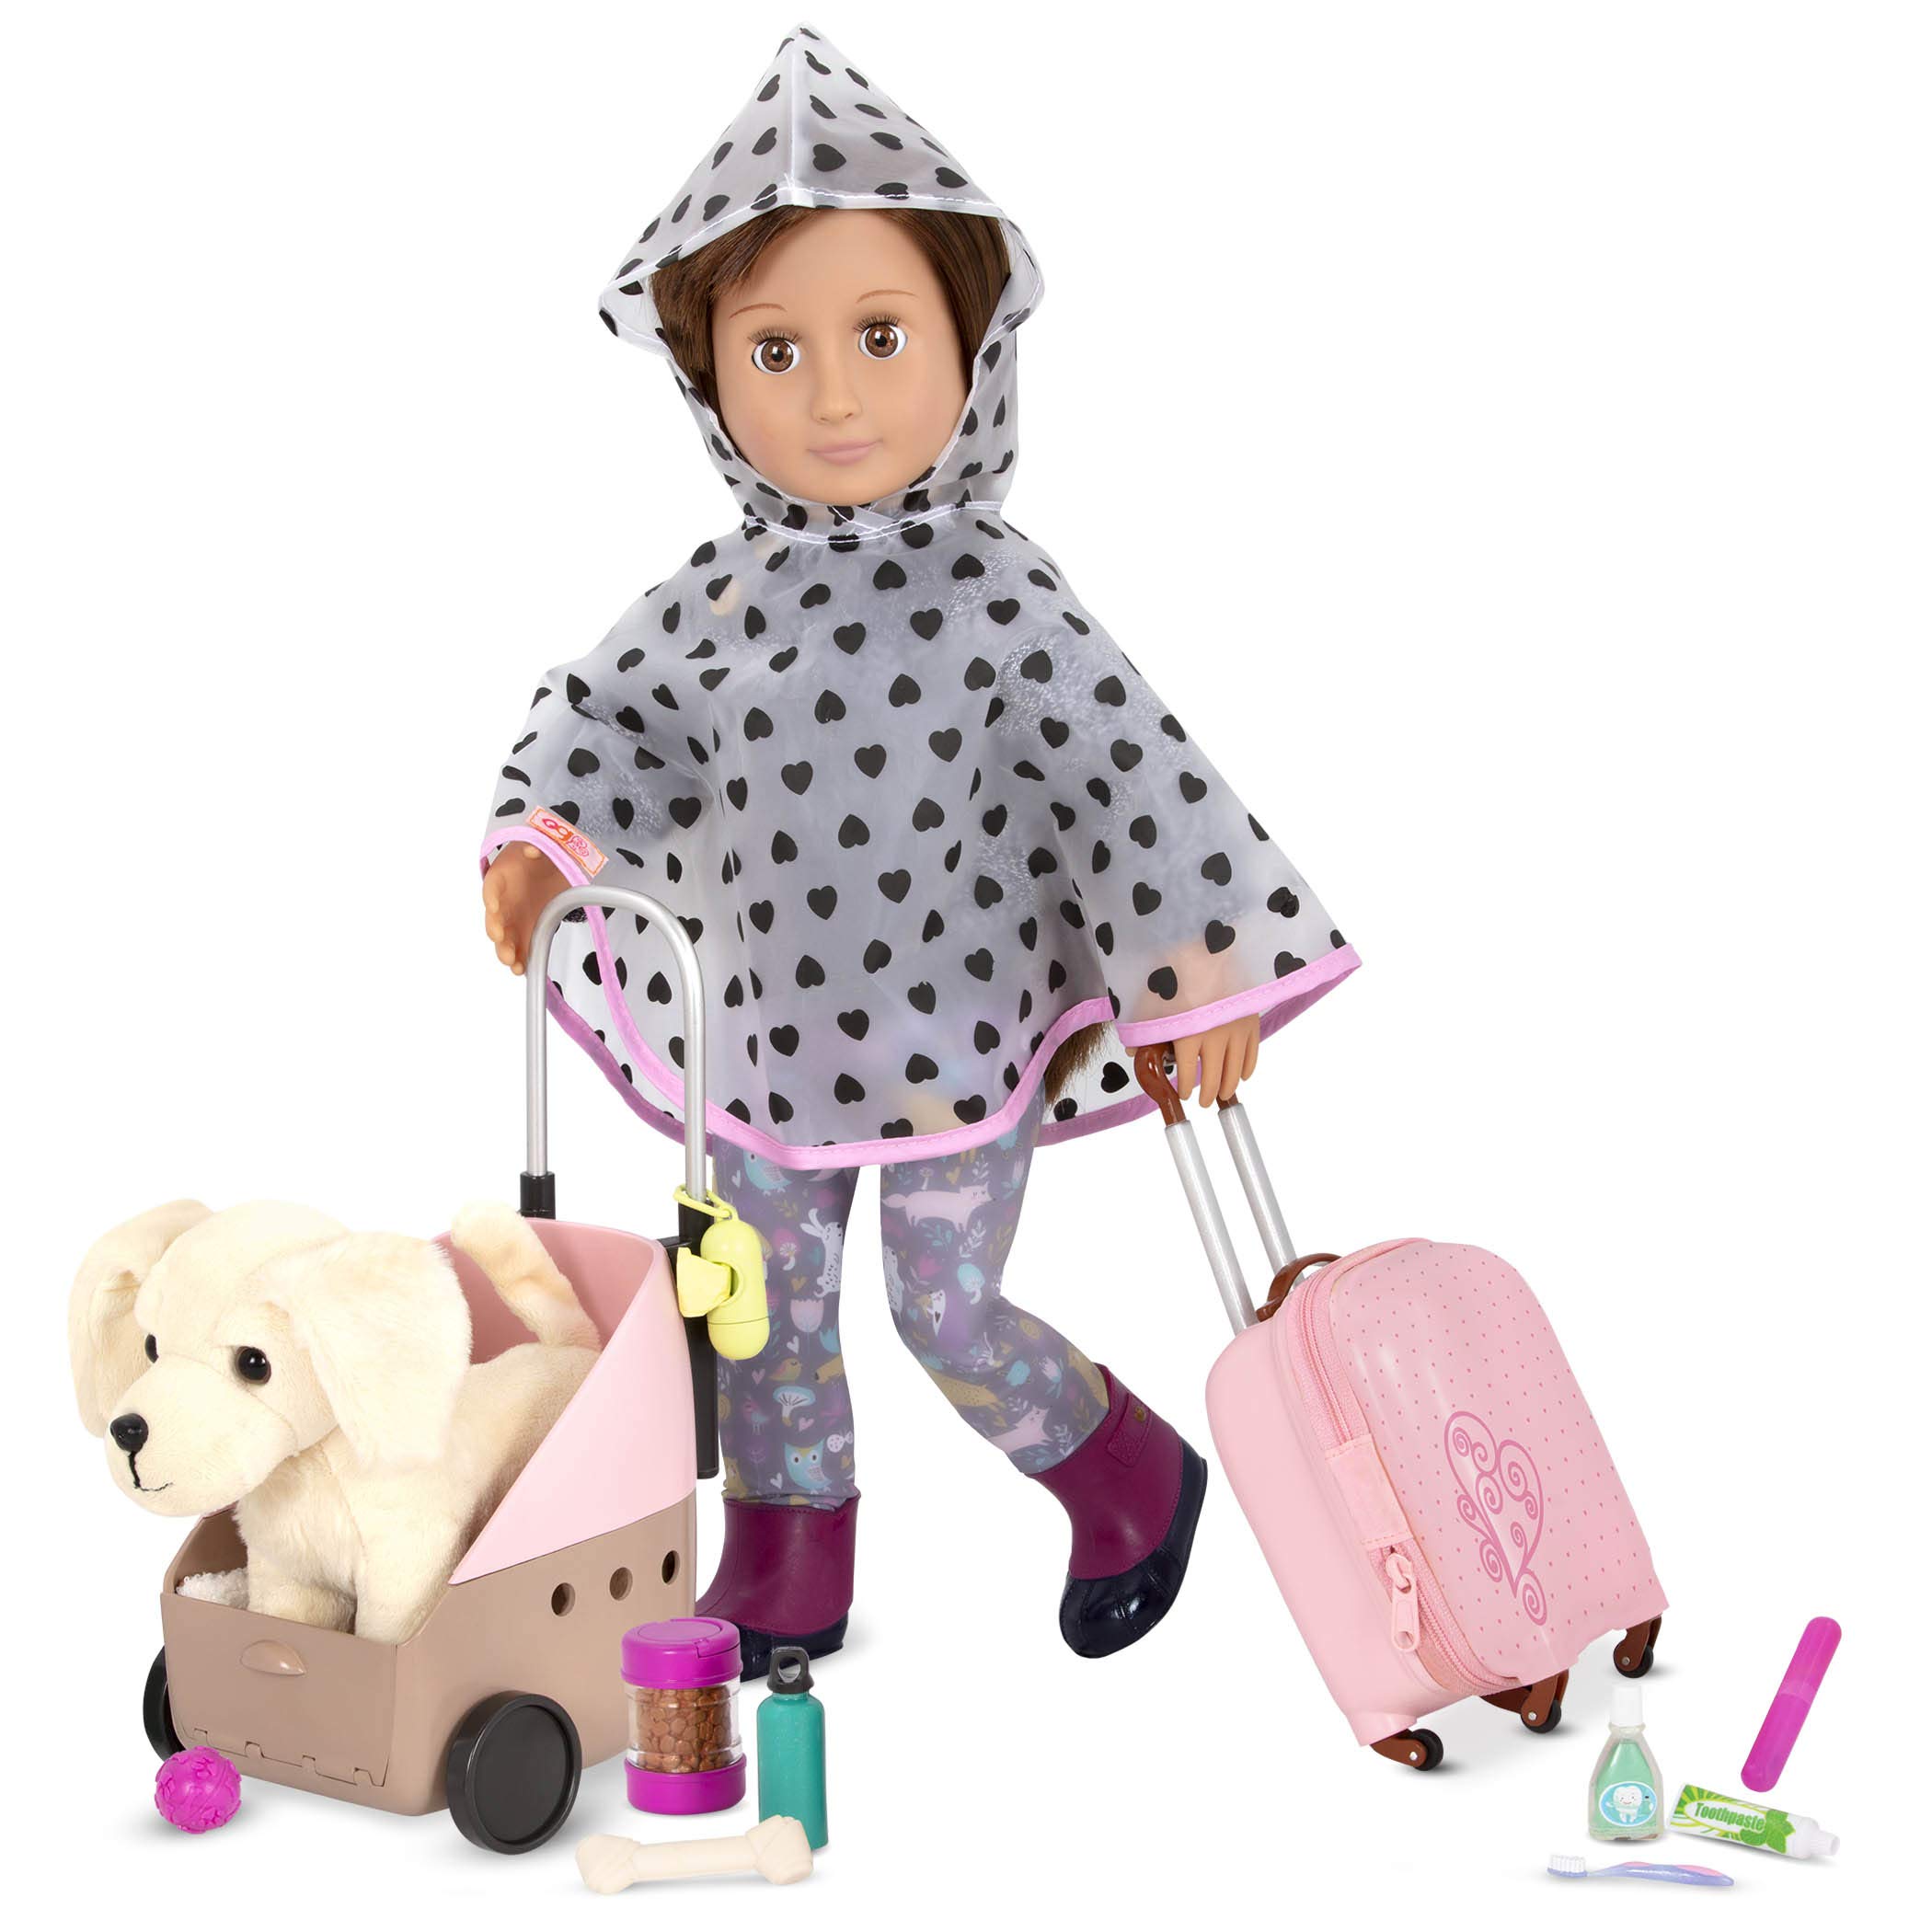 Our Generation- Passenger Pets- Playset, Accessory Set for 18-inch Dolls and Their Pets- Suitable for Ages 3+